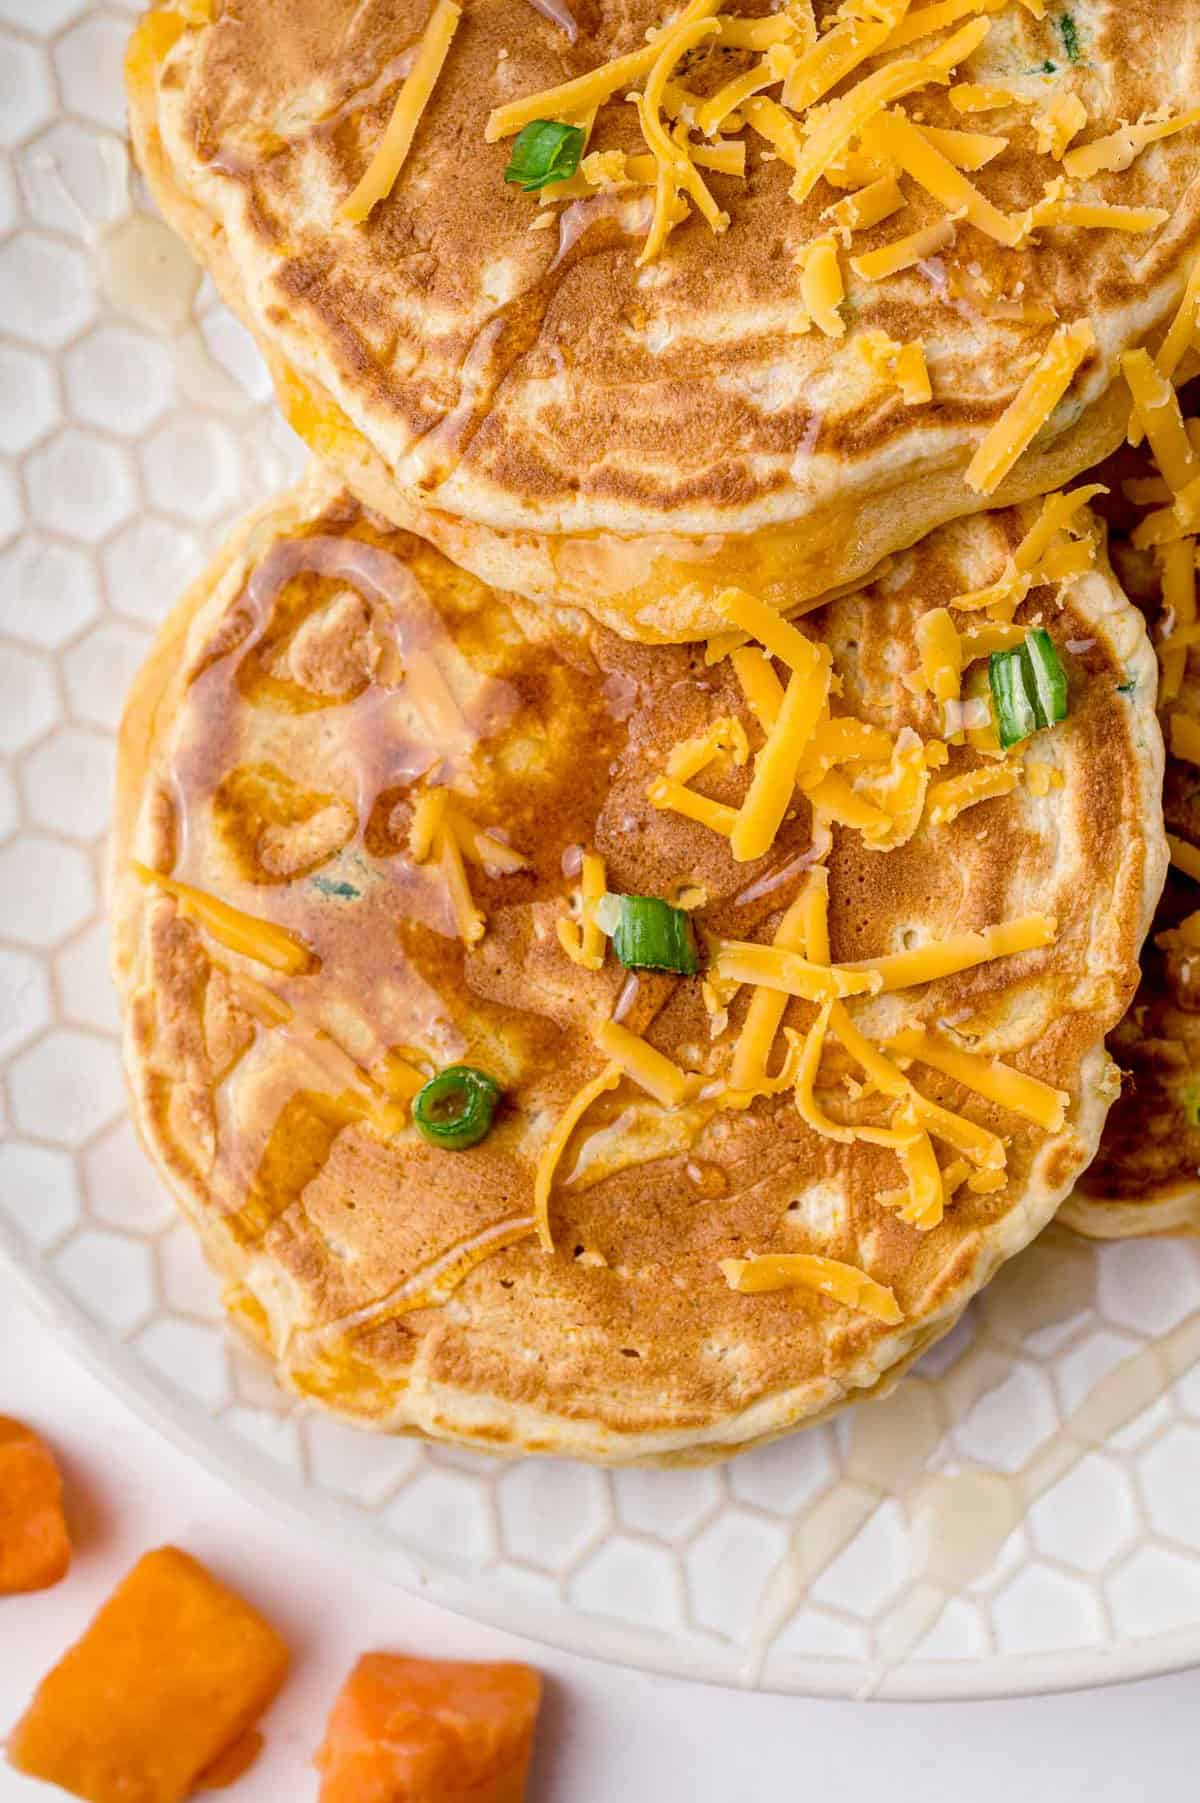 Pancakes topped with cheese.